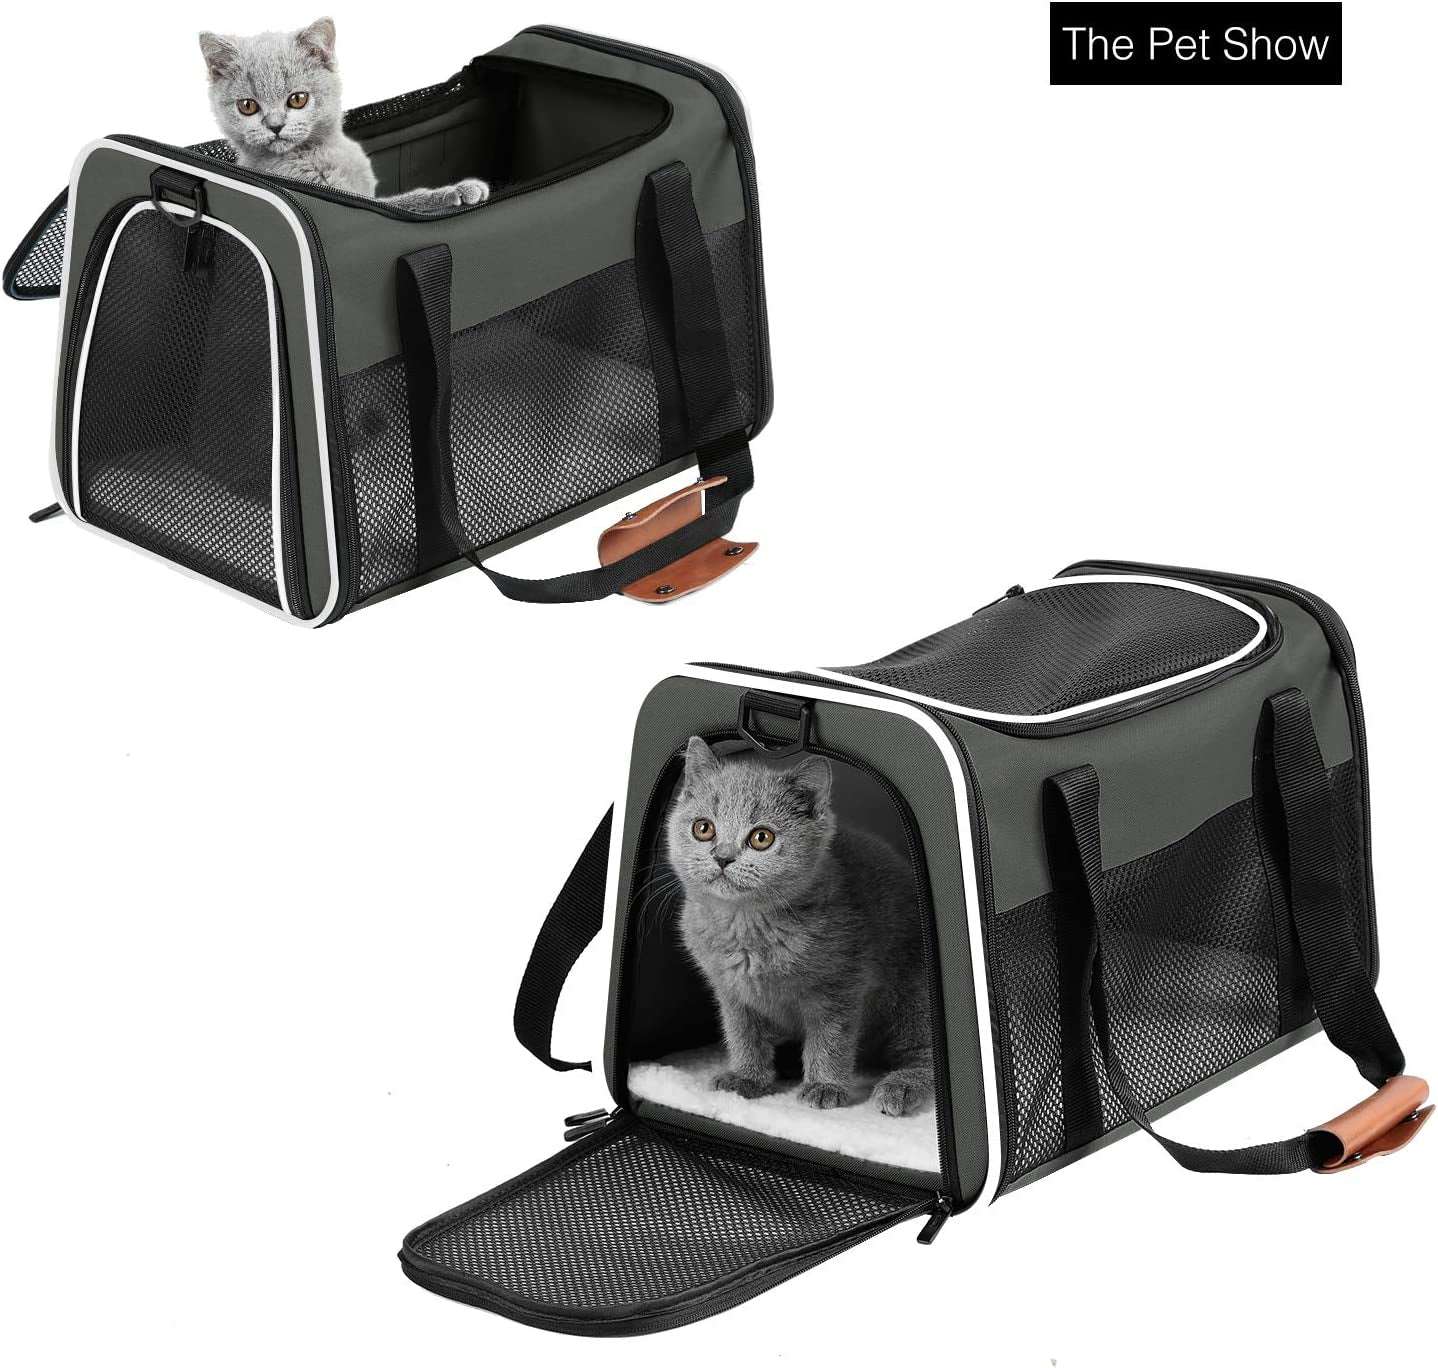 Airline Approved Pet Carriers,Soft Sided Collapsible Pet Travel Carrier for Puppy and Cats, Cats Carrier, Pet Carriers for Small Medium Cats - PETGS